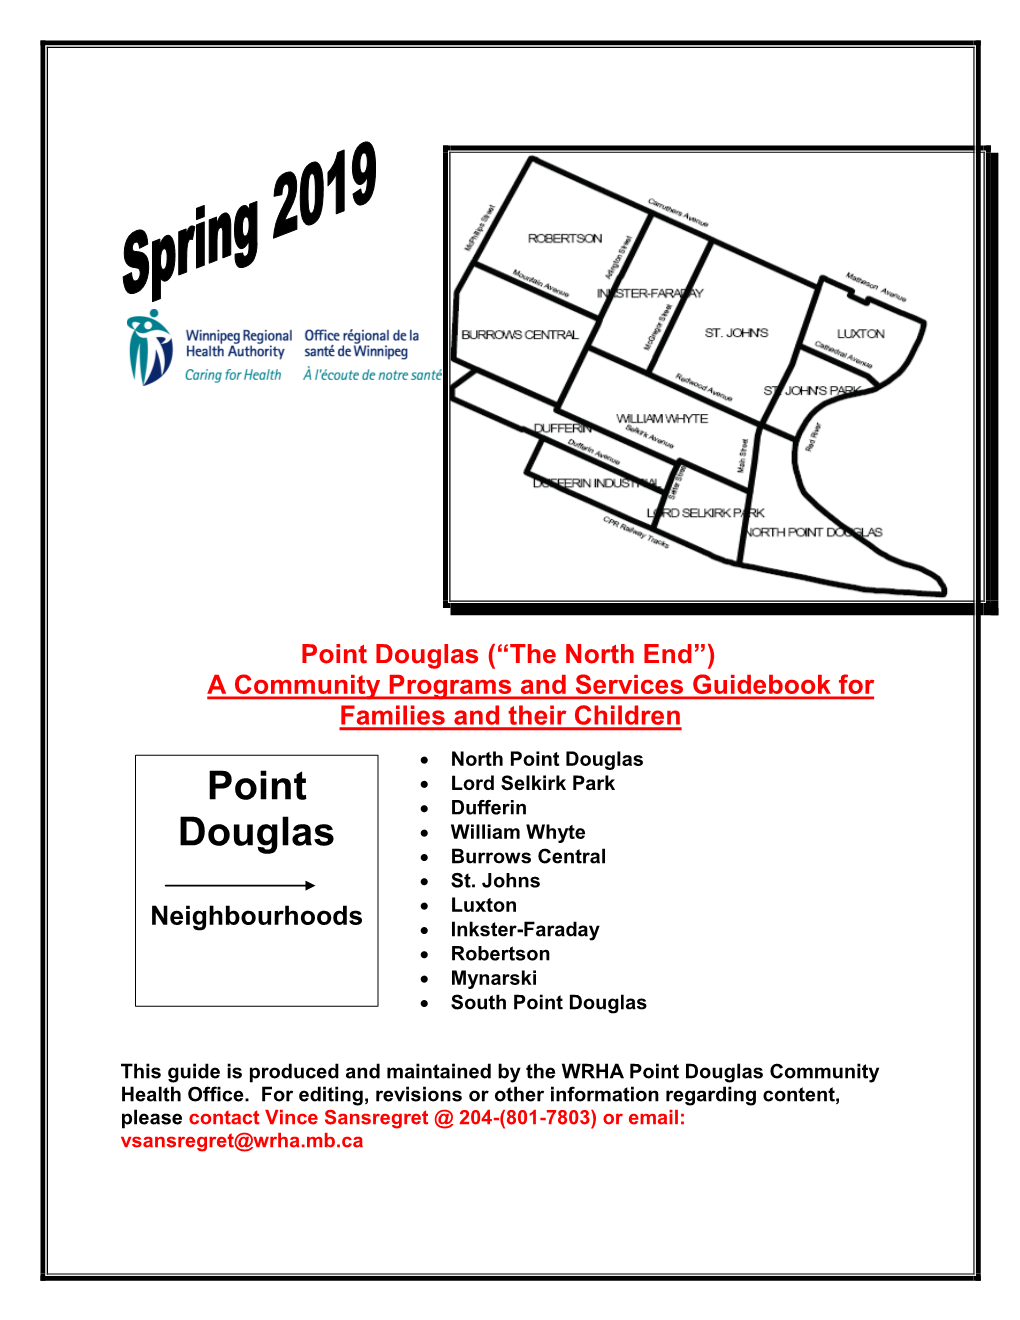 Point Douglas (“The North End”) a Community Programs and Services Guidebook for Families and Their Children